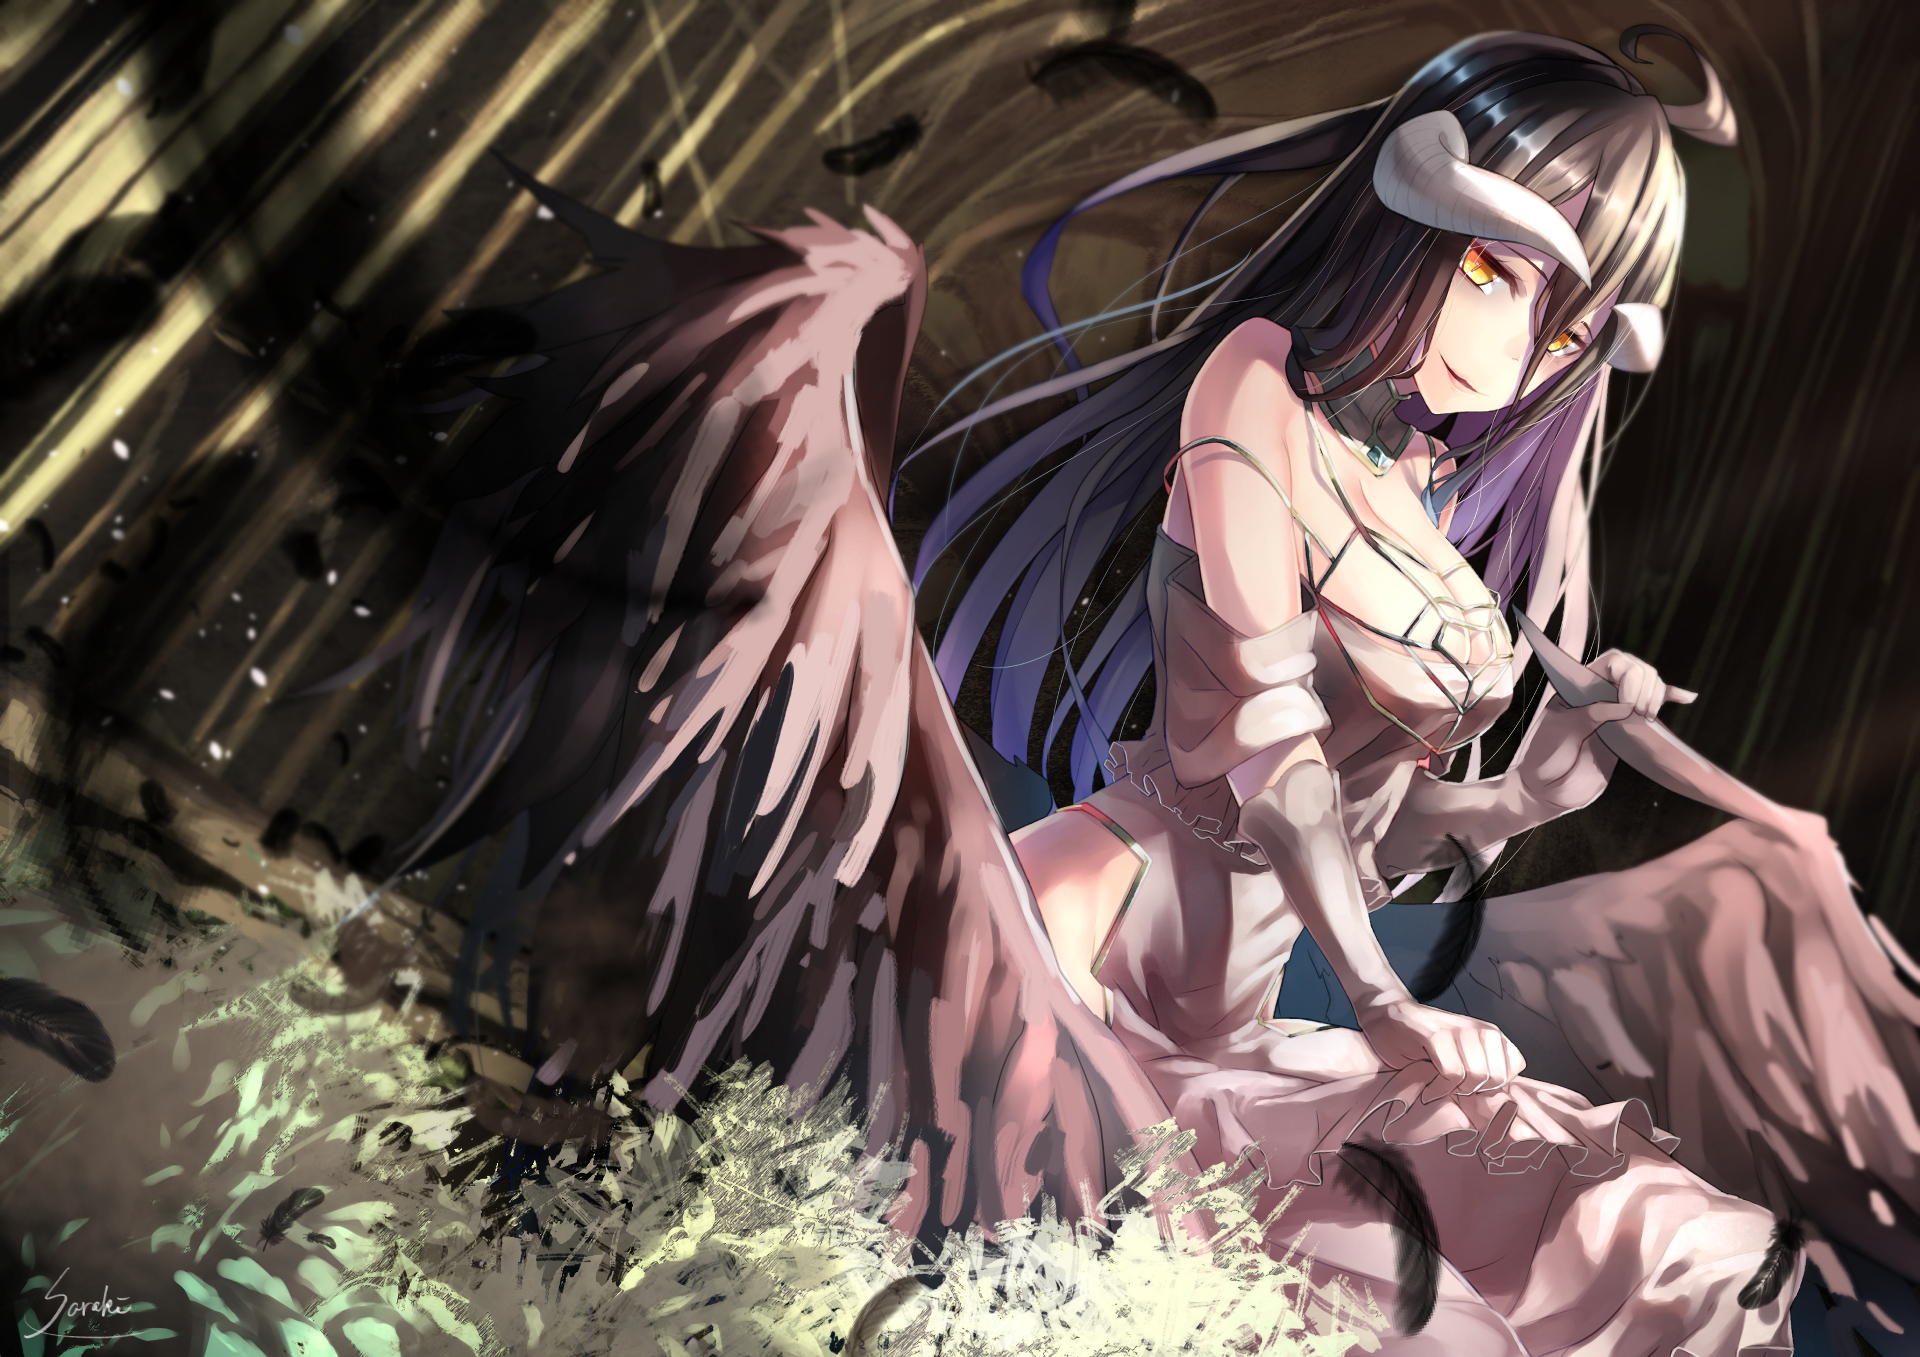 1920x1357 110+ Albedo (Overlord) HD Wallpapers and Backgrounds